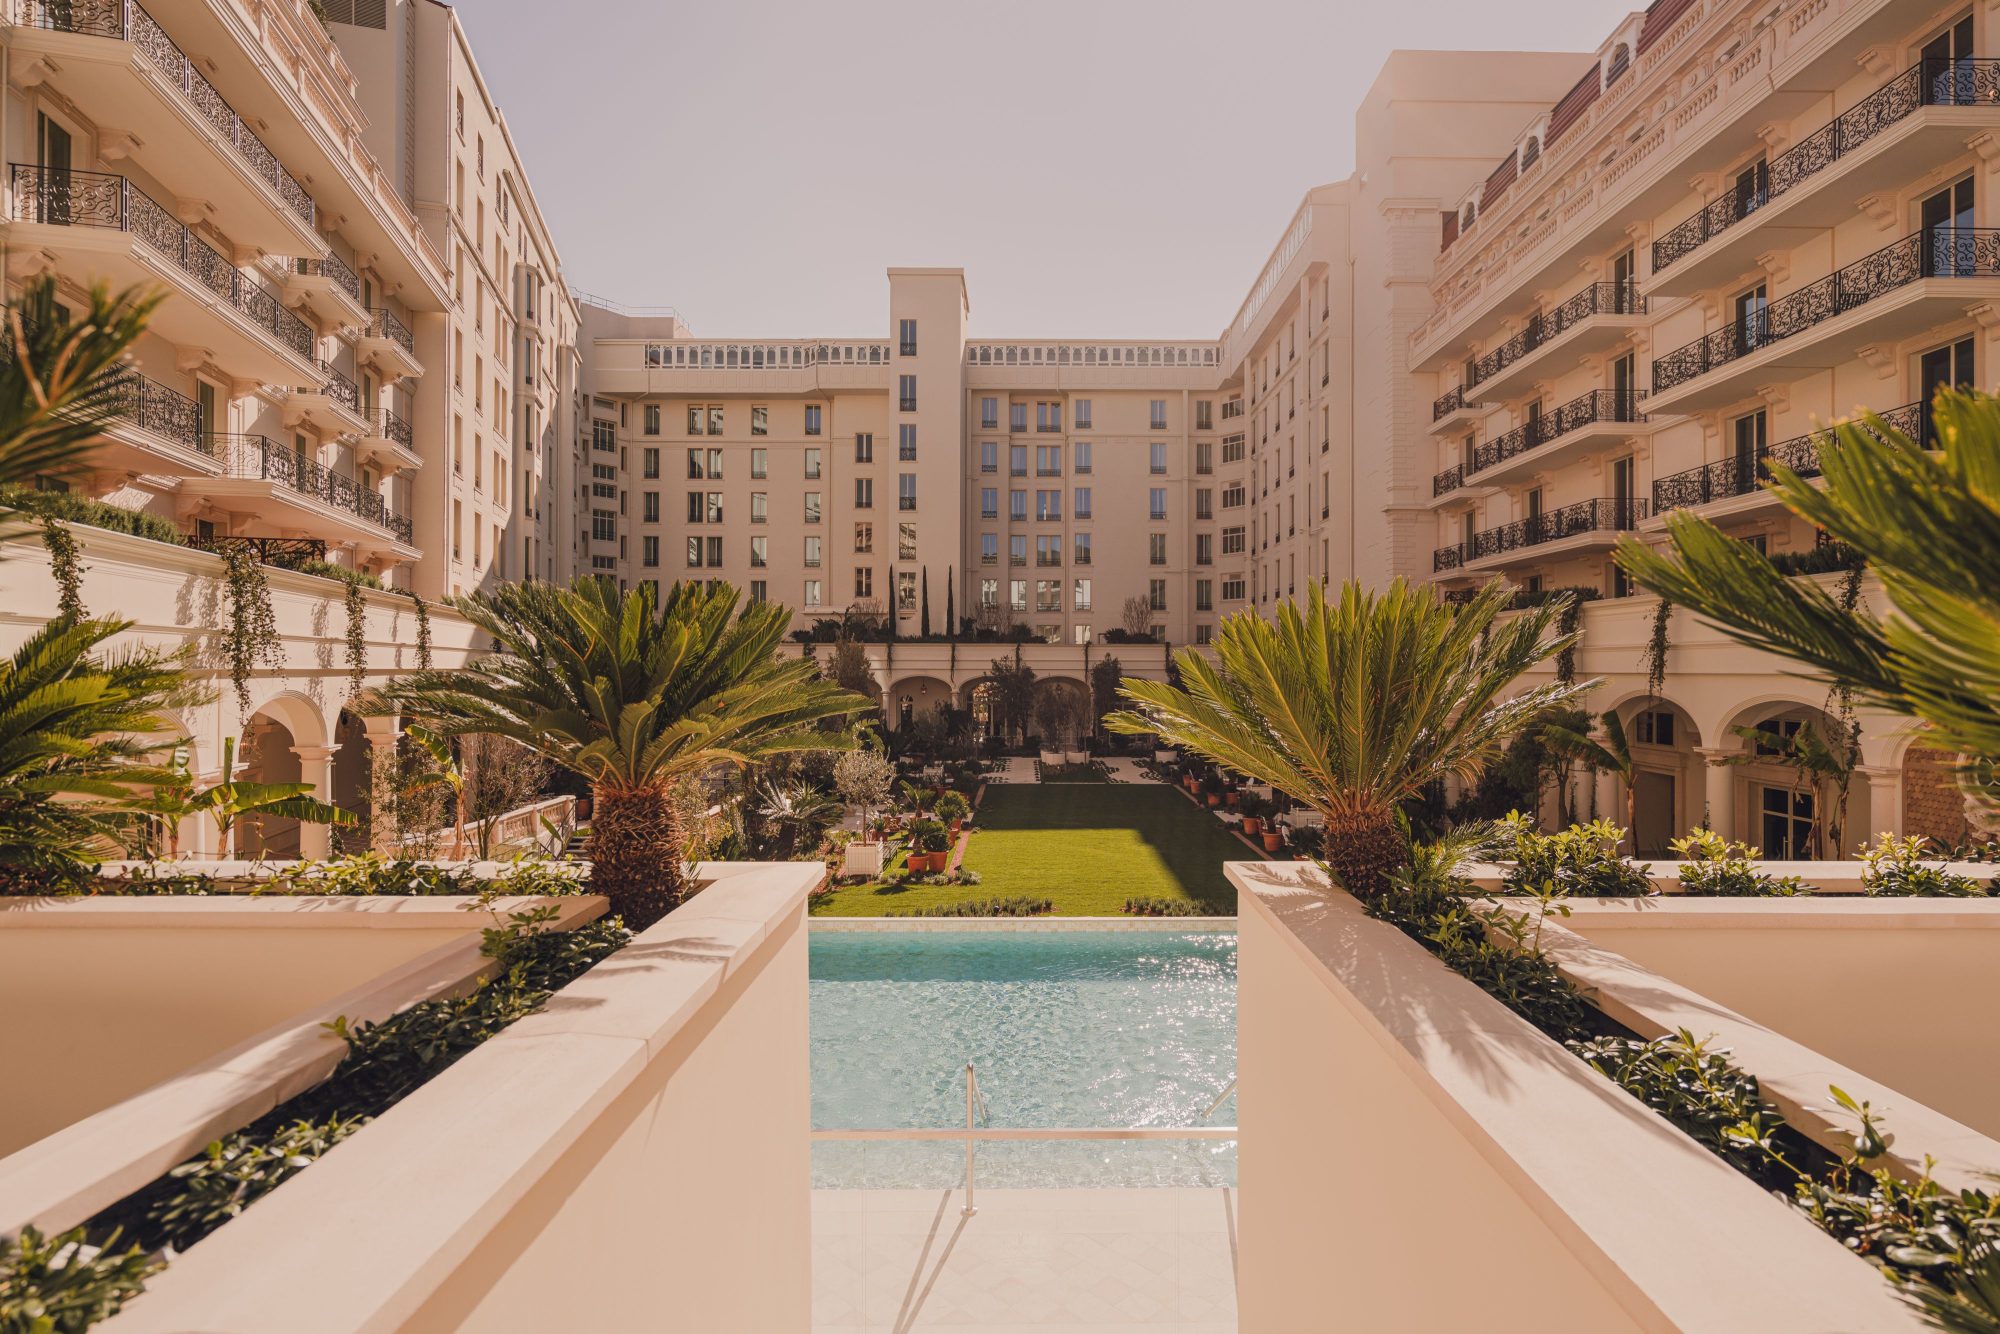 Carlton Cannes to become Europe’s first new generation Regent Hotel in spring 2023